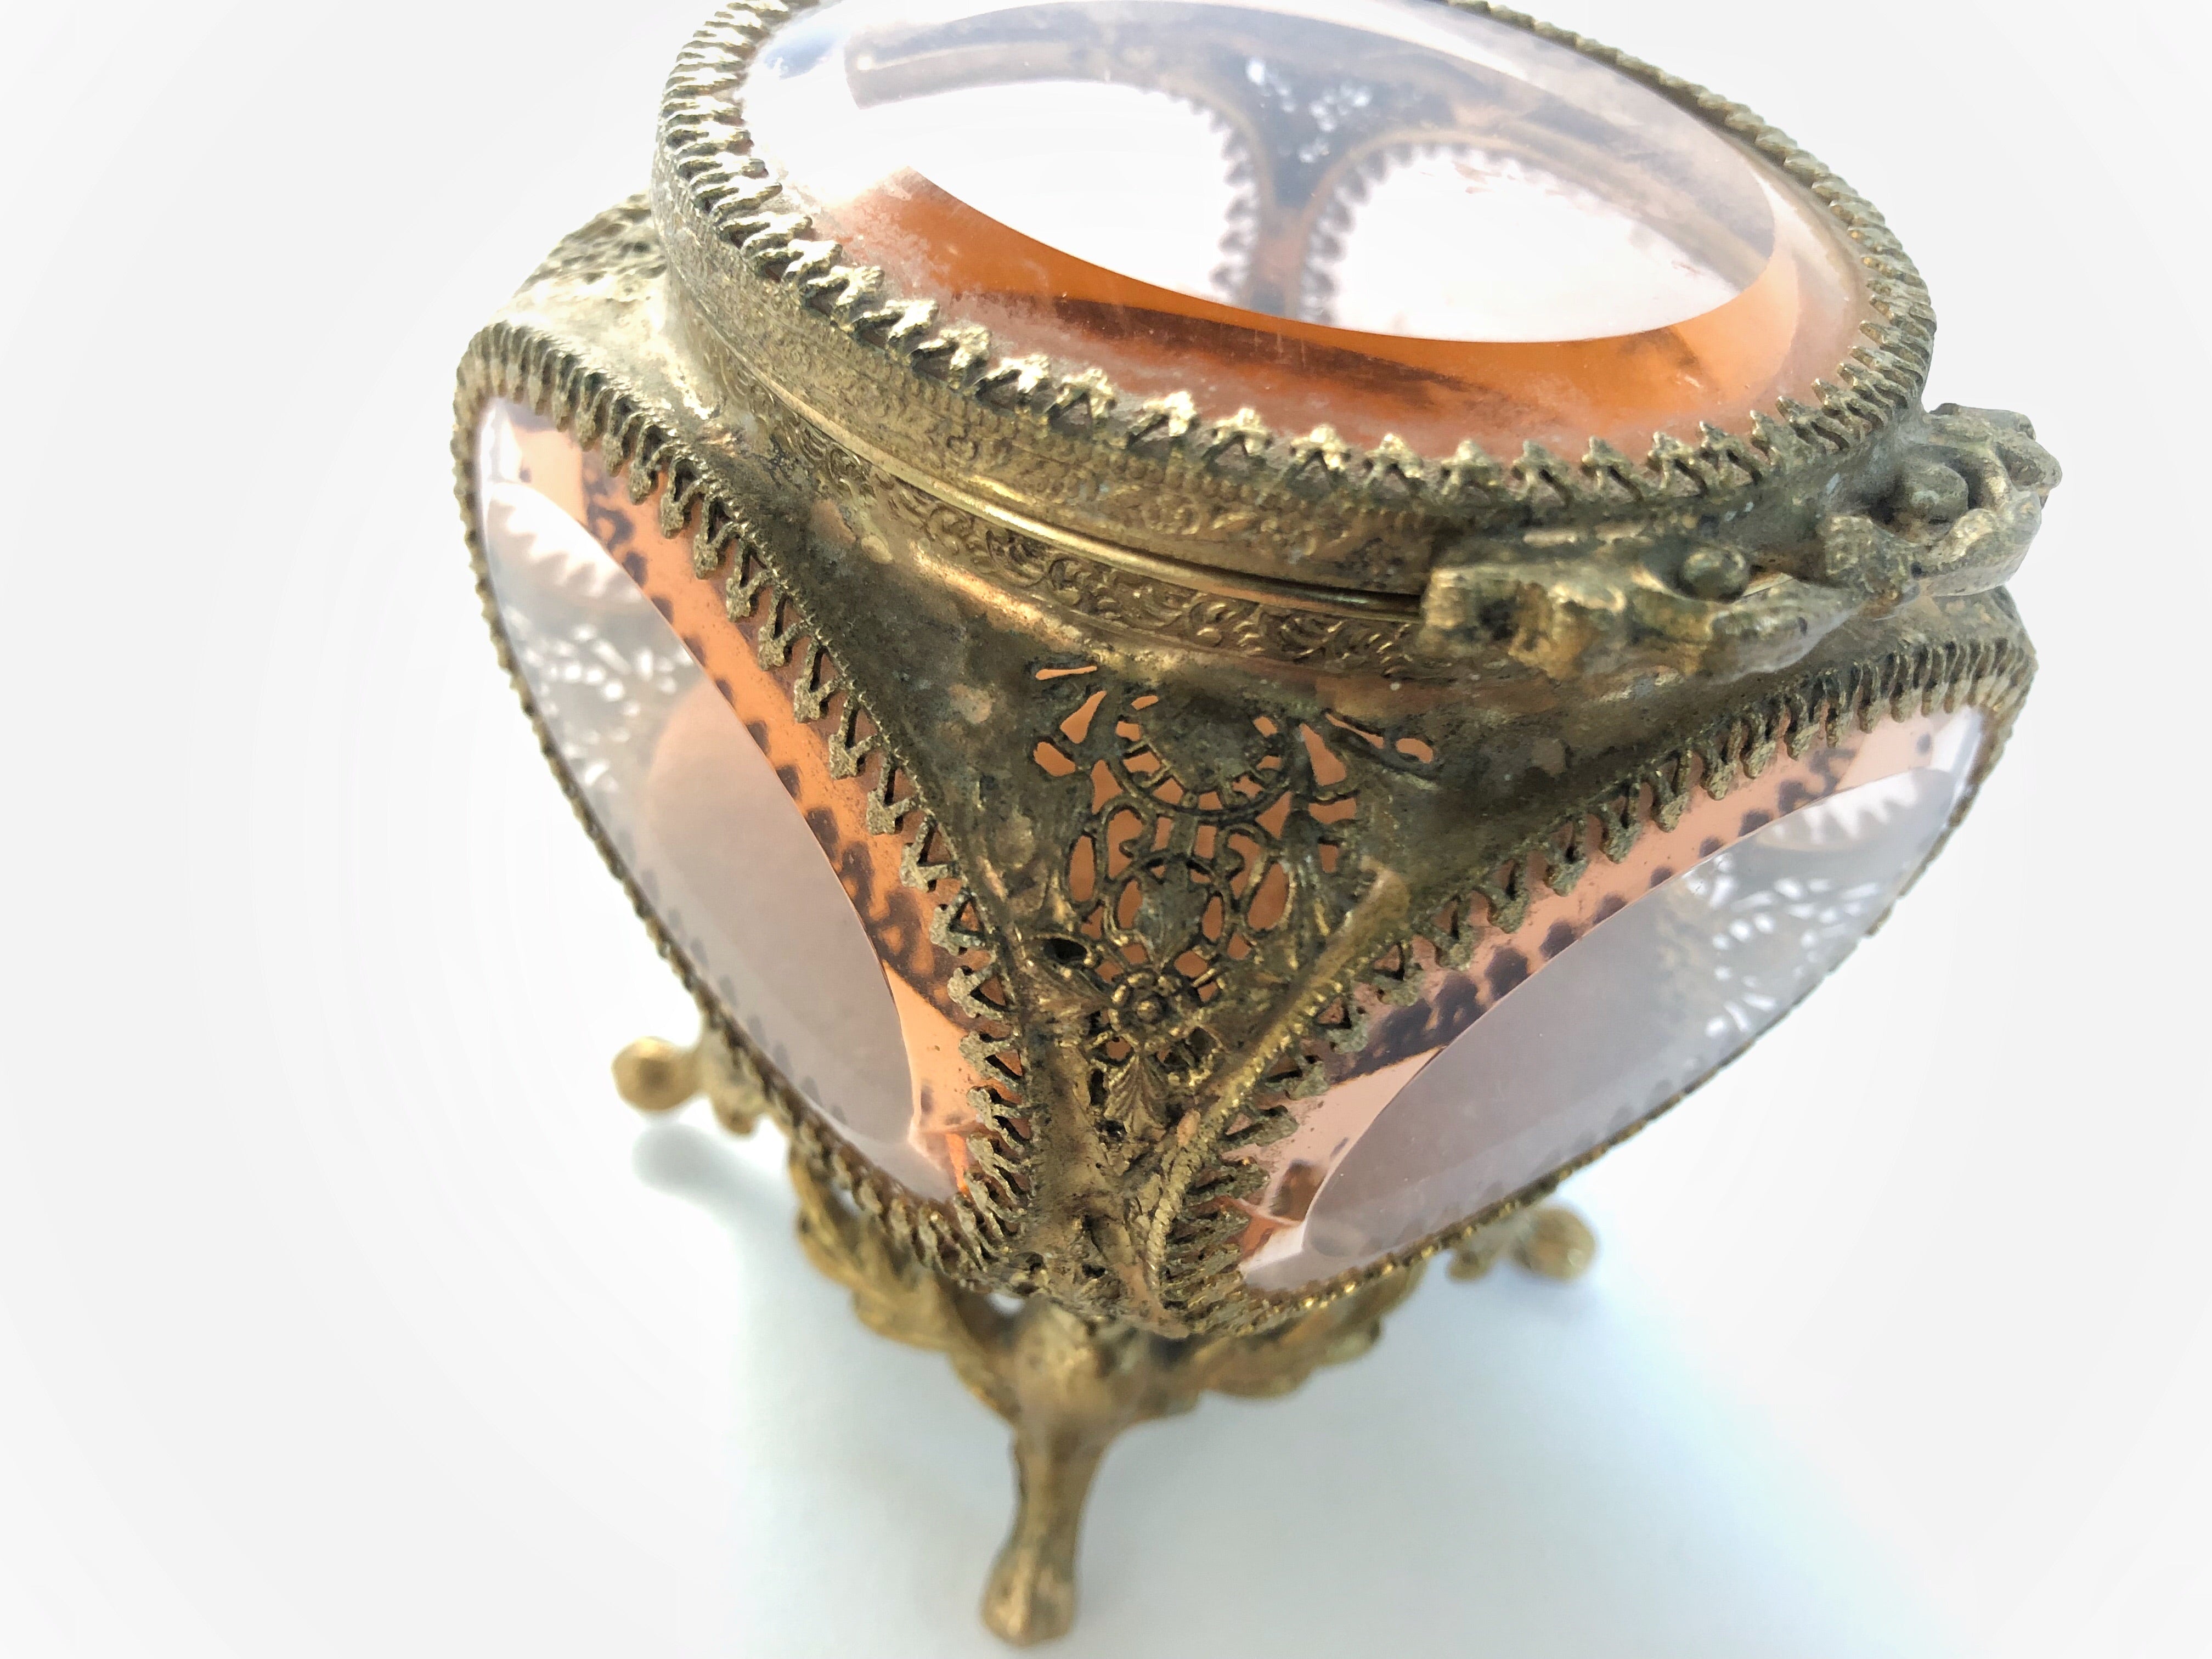 Rare Amber Tinted French Victorian Jewelry Box